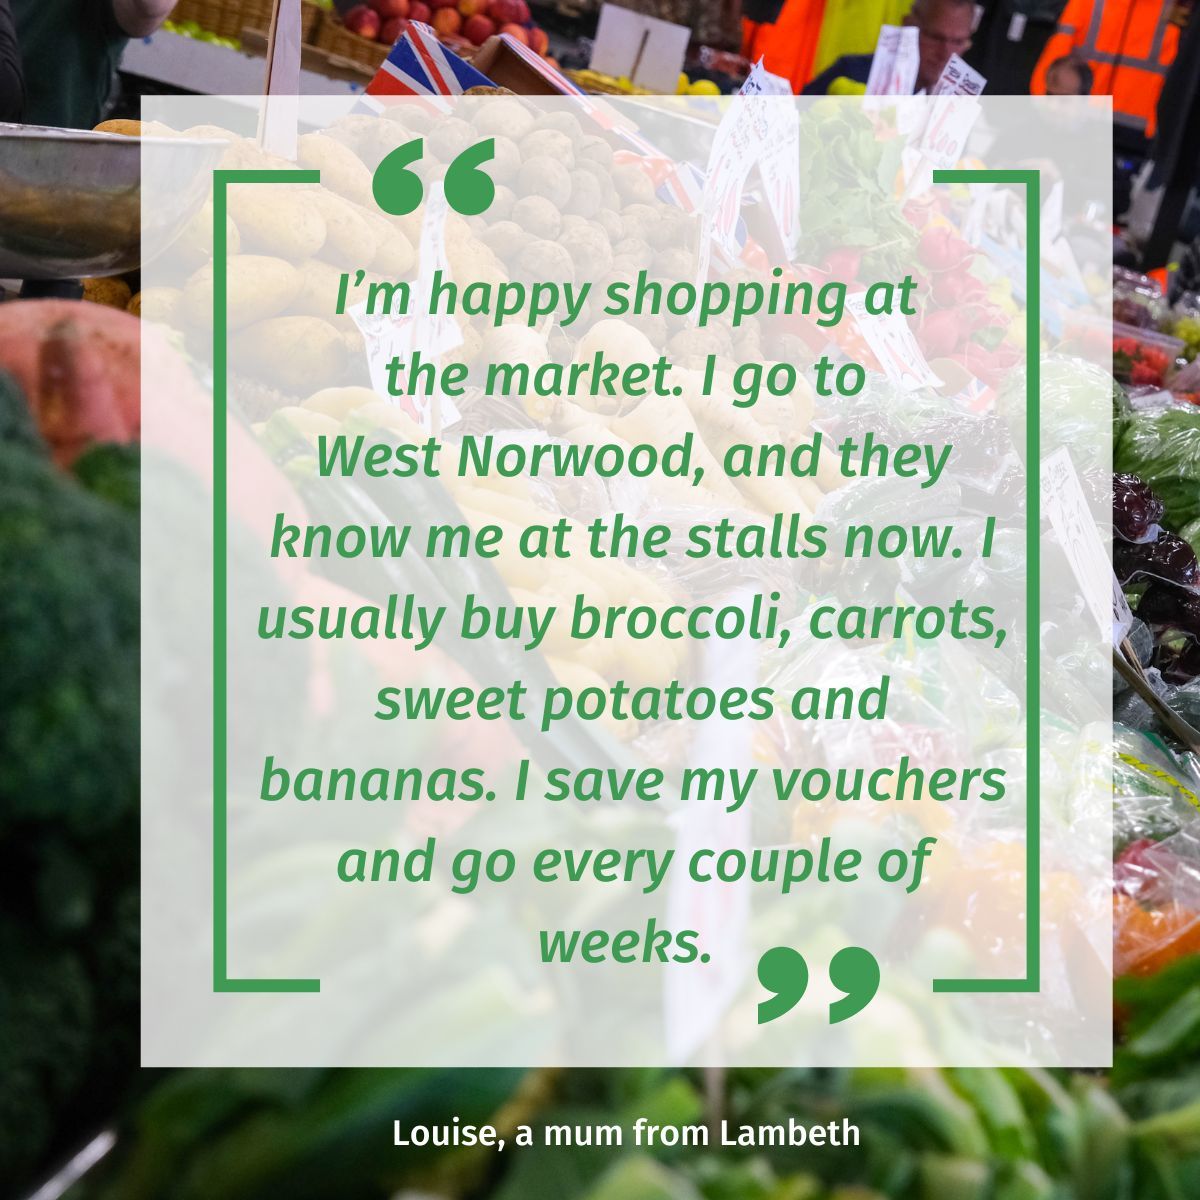 'Having the Rose Vouchers is so, so helpful. With the vouchers, I know I can buy the fruit & veg I need.' Louise #Lambeth buff.ly/3qlCfZt